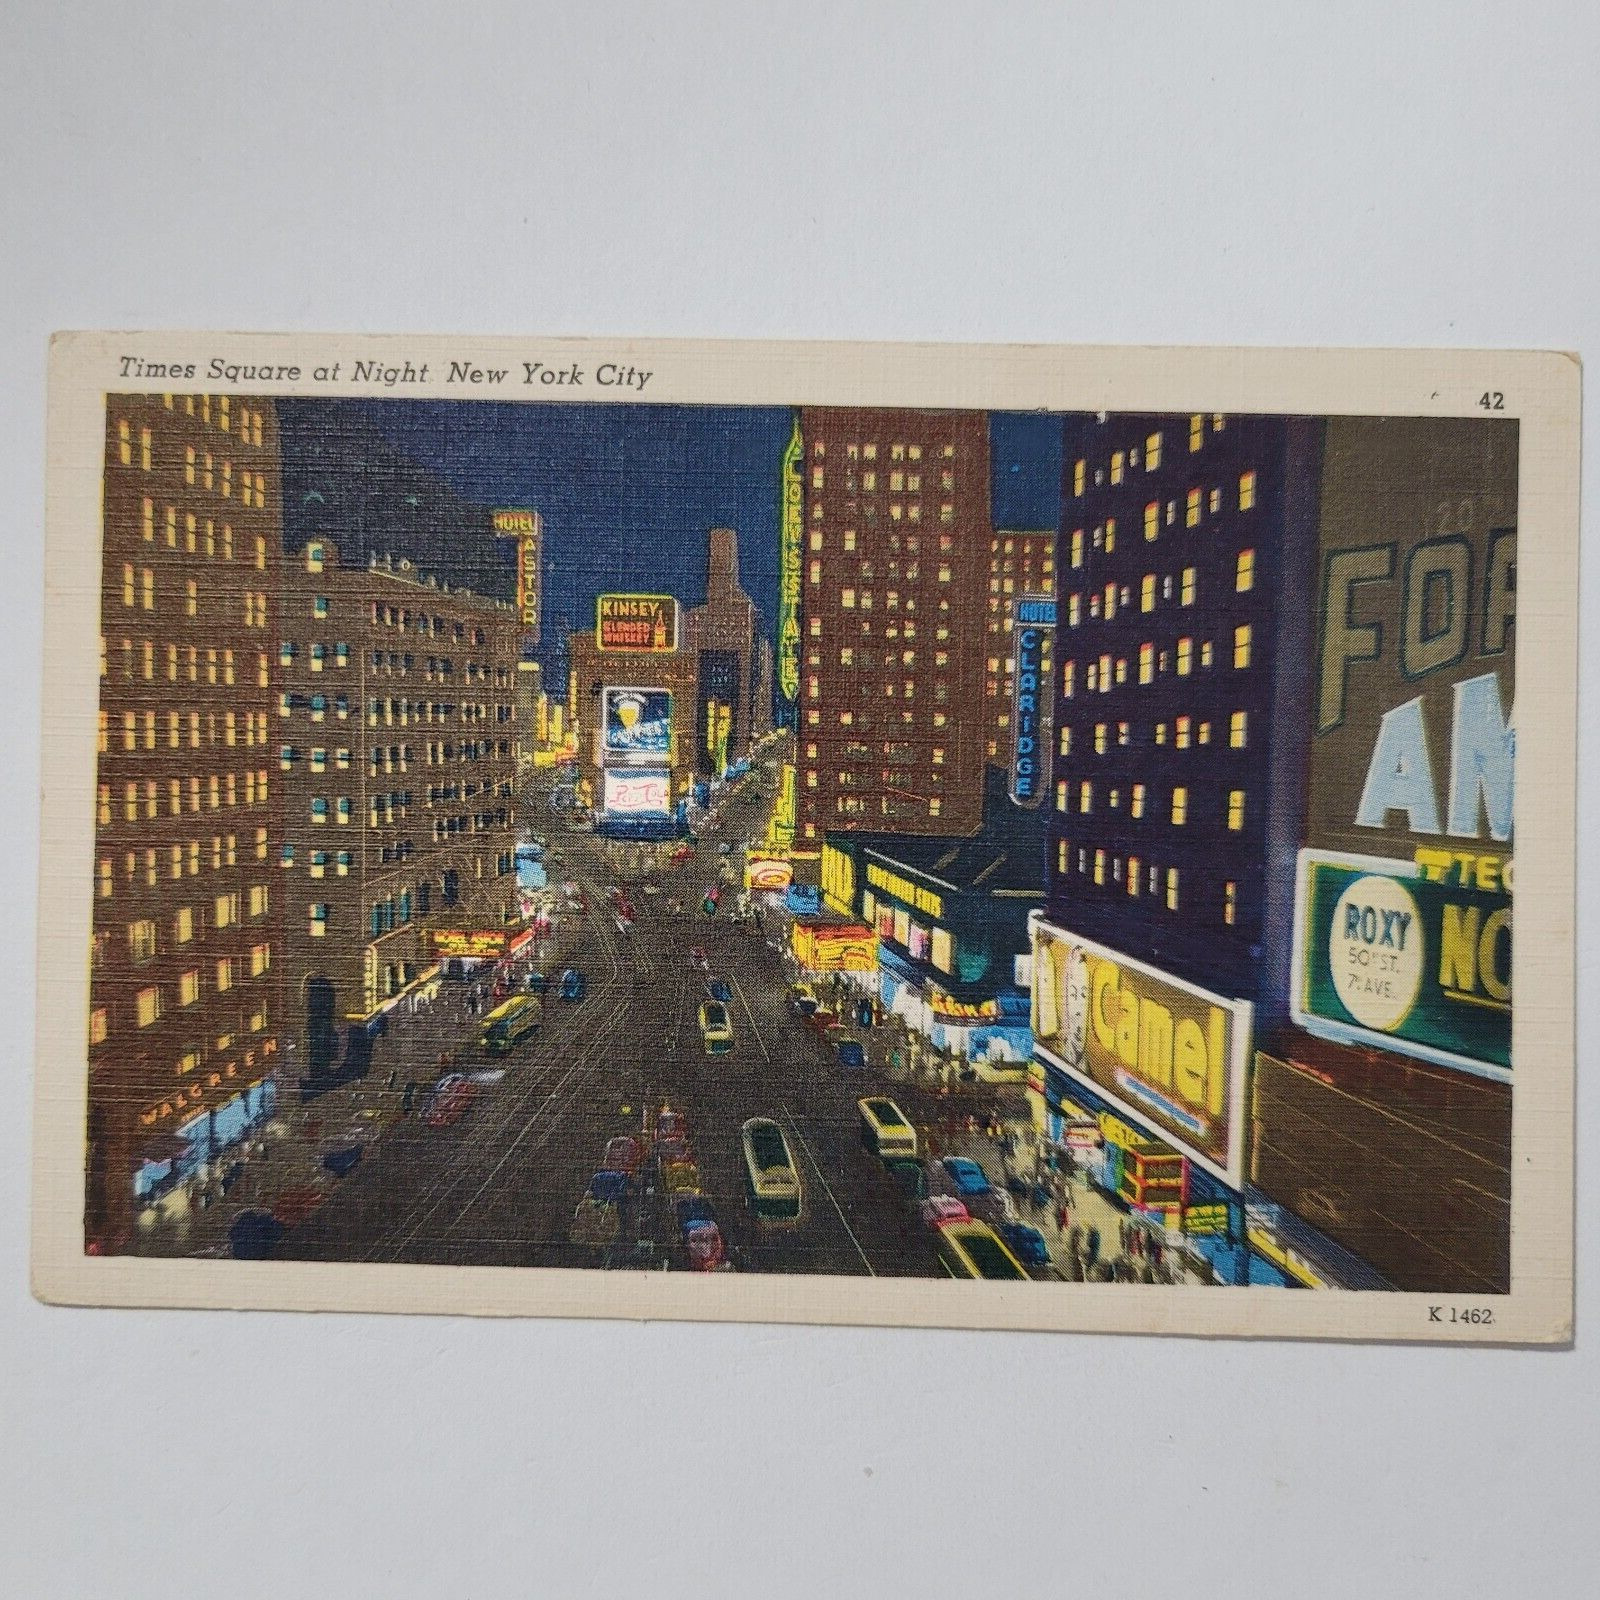 New York City NY Times Square At Night Linen Vintage Postcard Camel Pepsi Ads